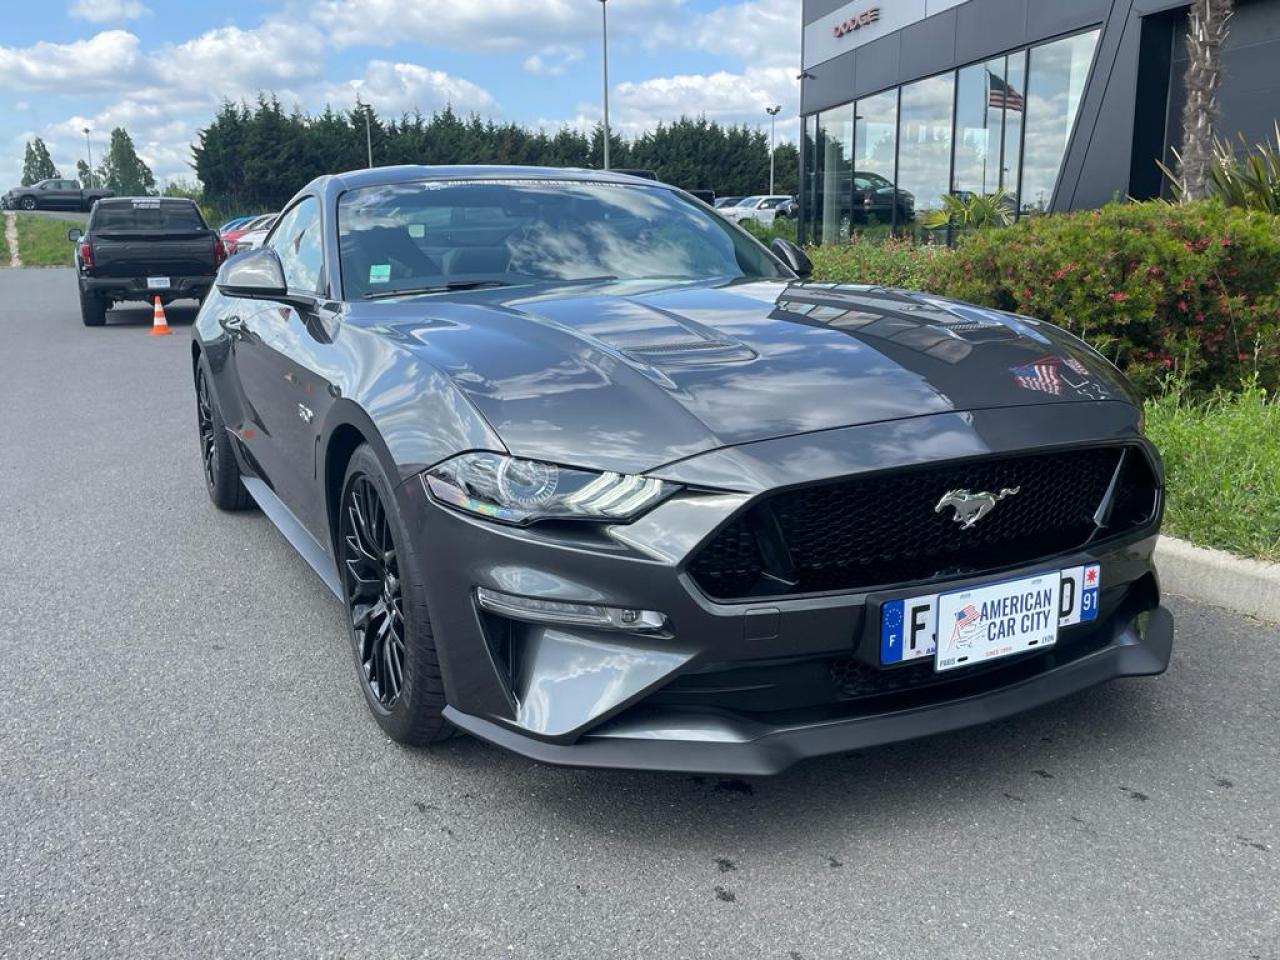 FORD MUSTANG FORD GT V8 5.0L PAS DE MALUS